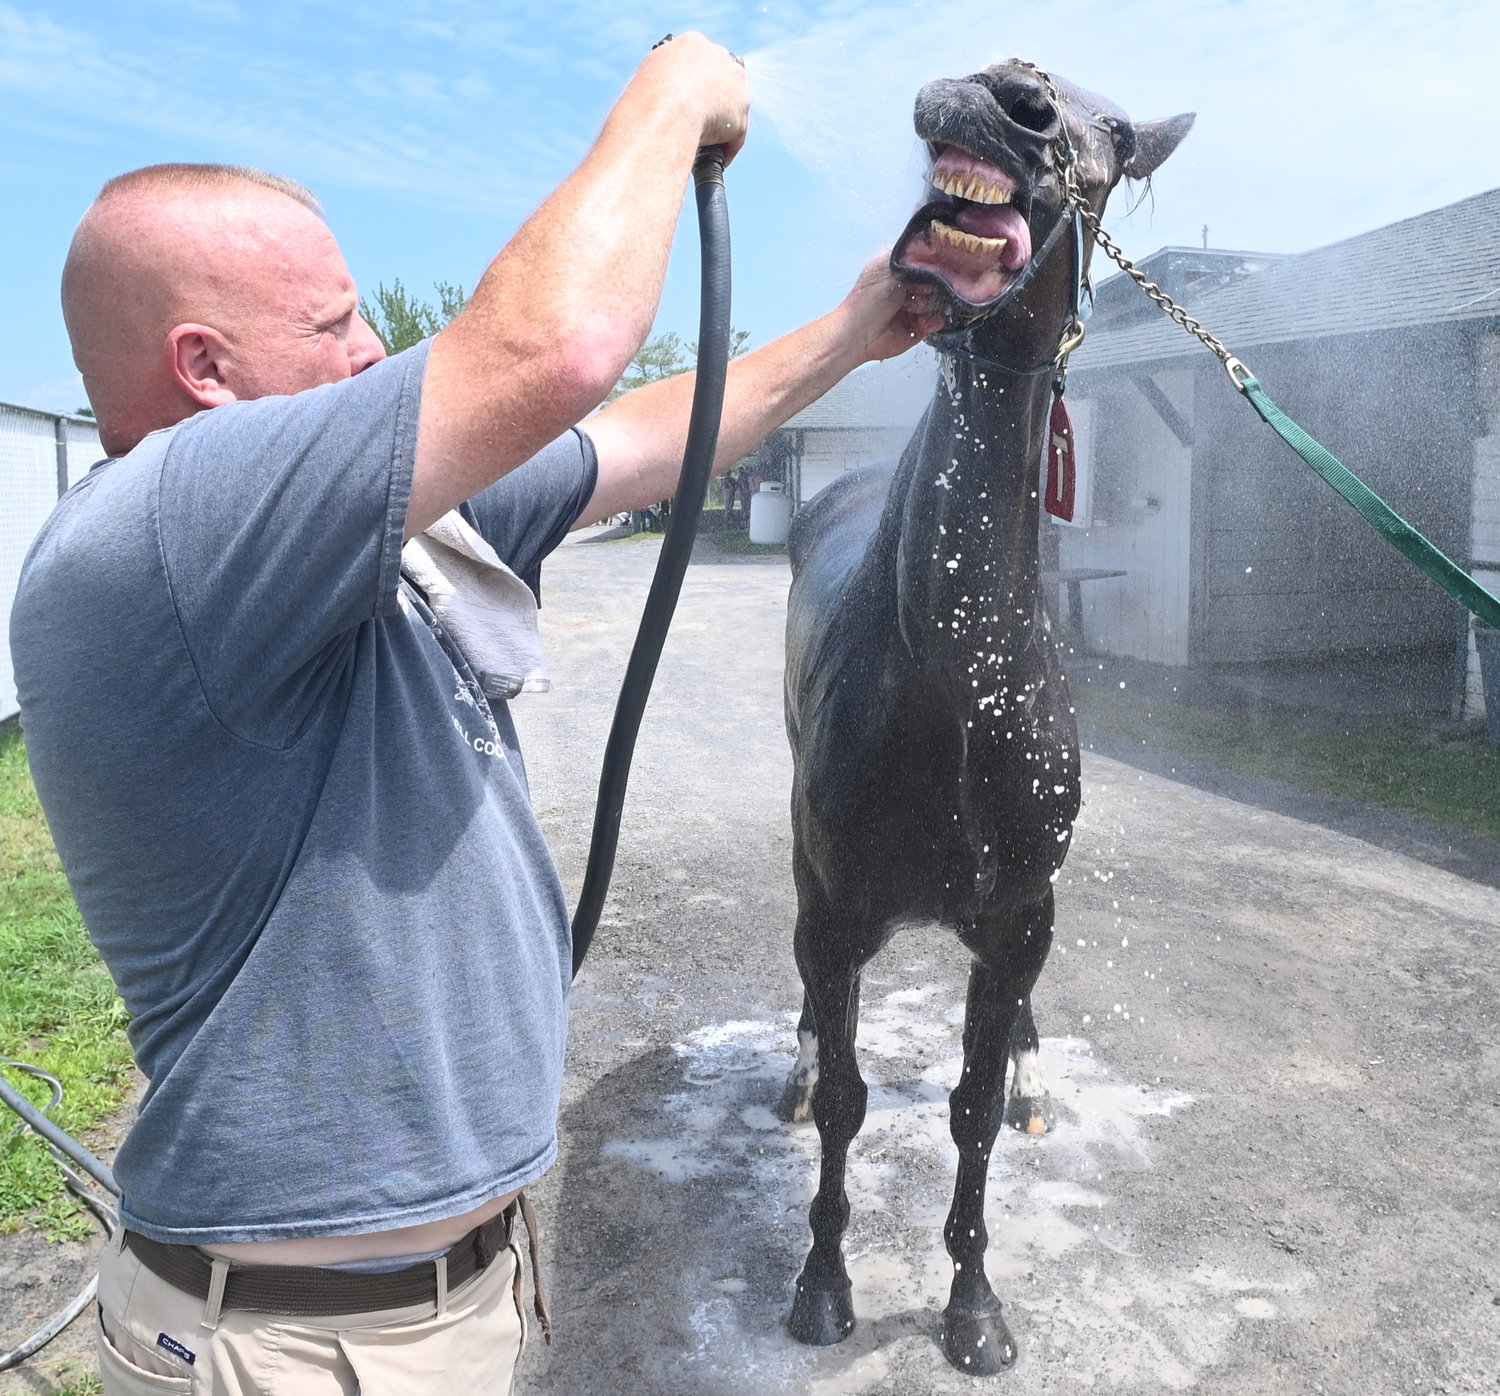 Kerin Warner hoses down Fancy Knows, the winner of the second race, on Friday afternoon at Vernon Downs. Warner teaches the horse racing program at Morrisville Equine School. Fancy Knows was driven by Justin Huckabone.